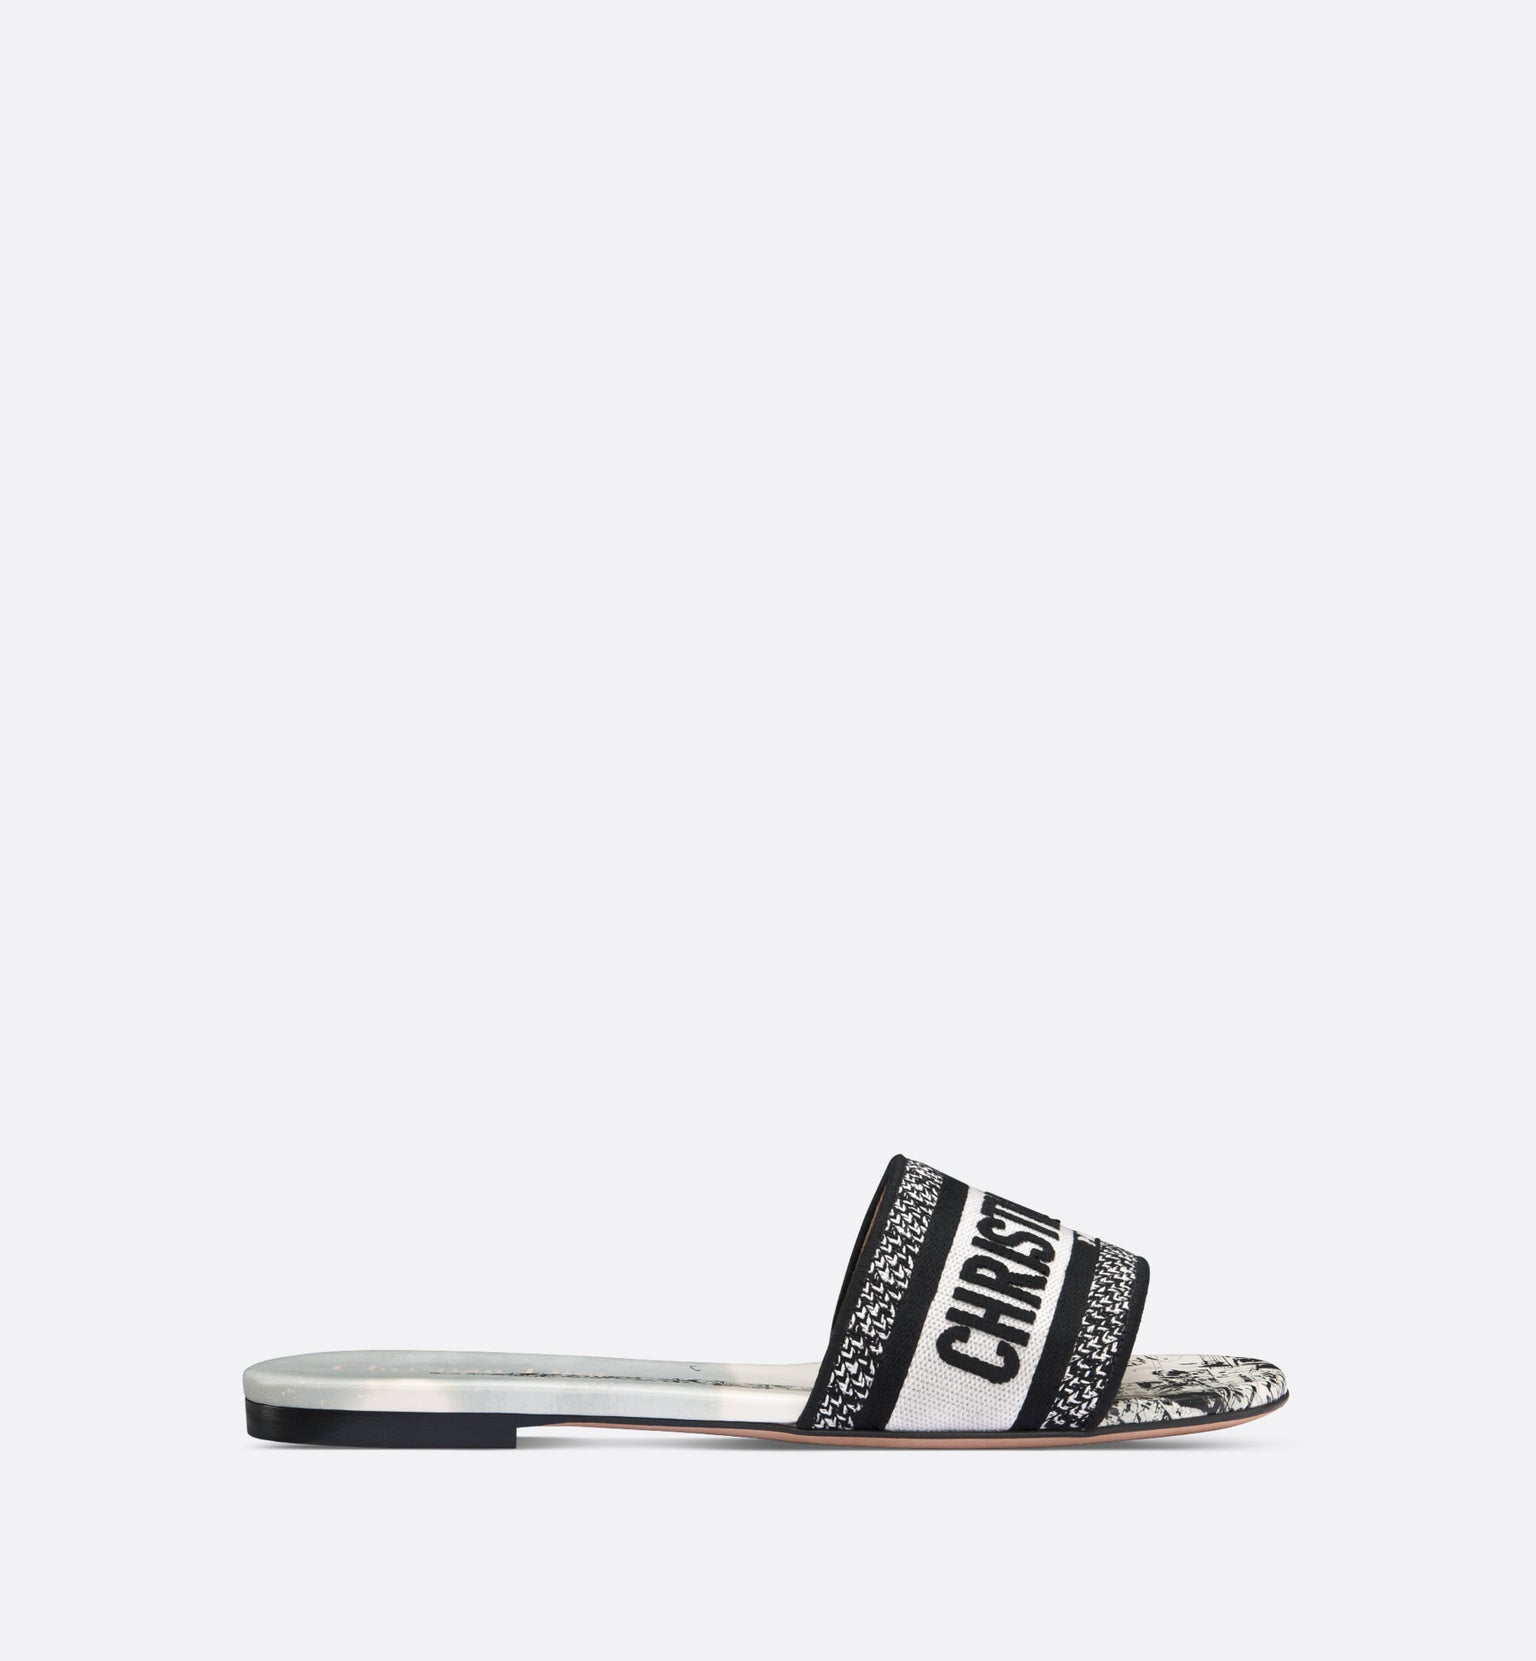 Dway Slide • Cotton Embroidered with White and Black Paris Motif